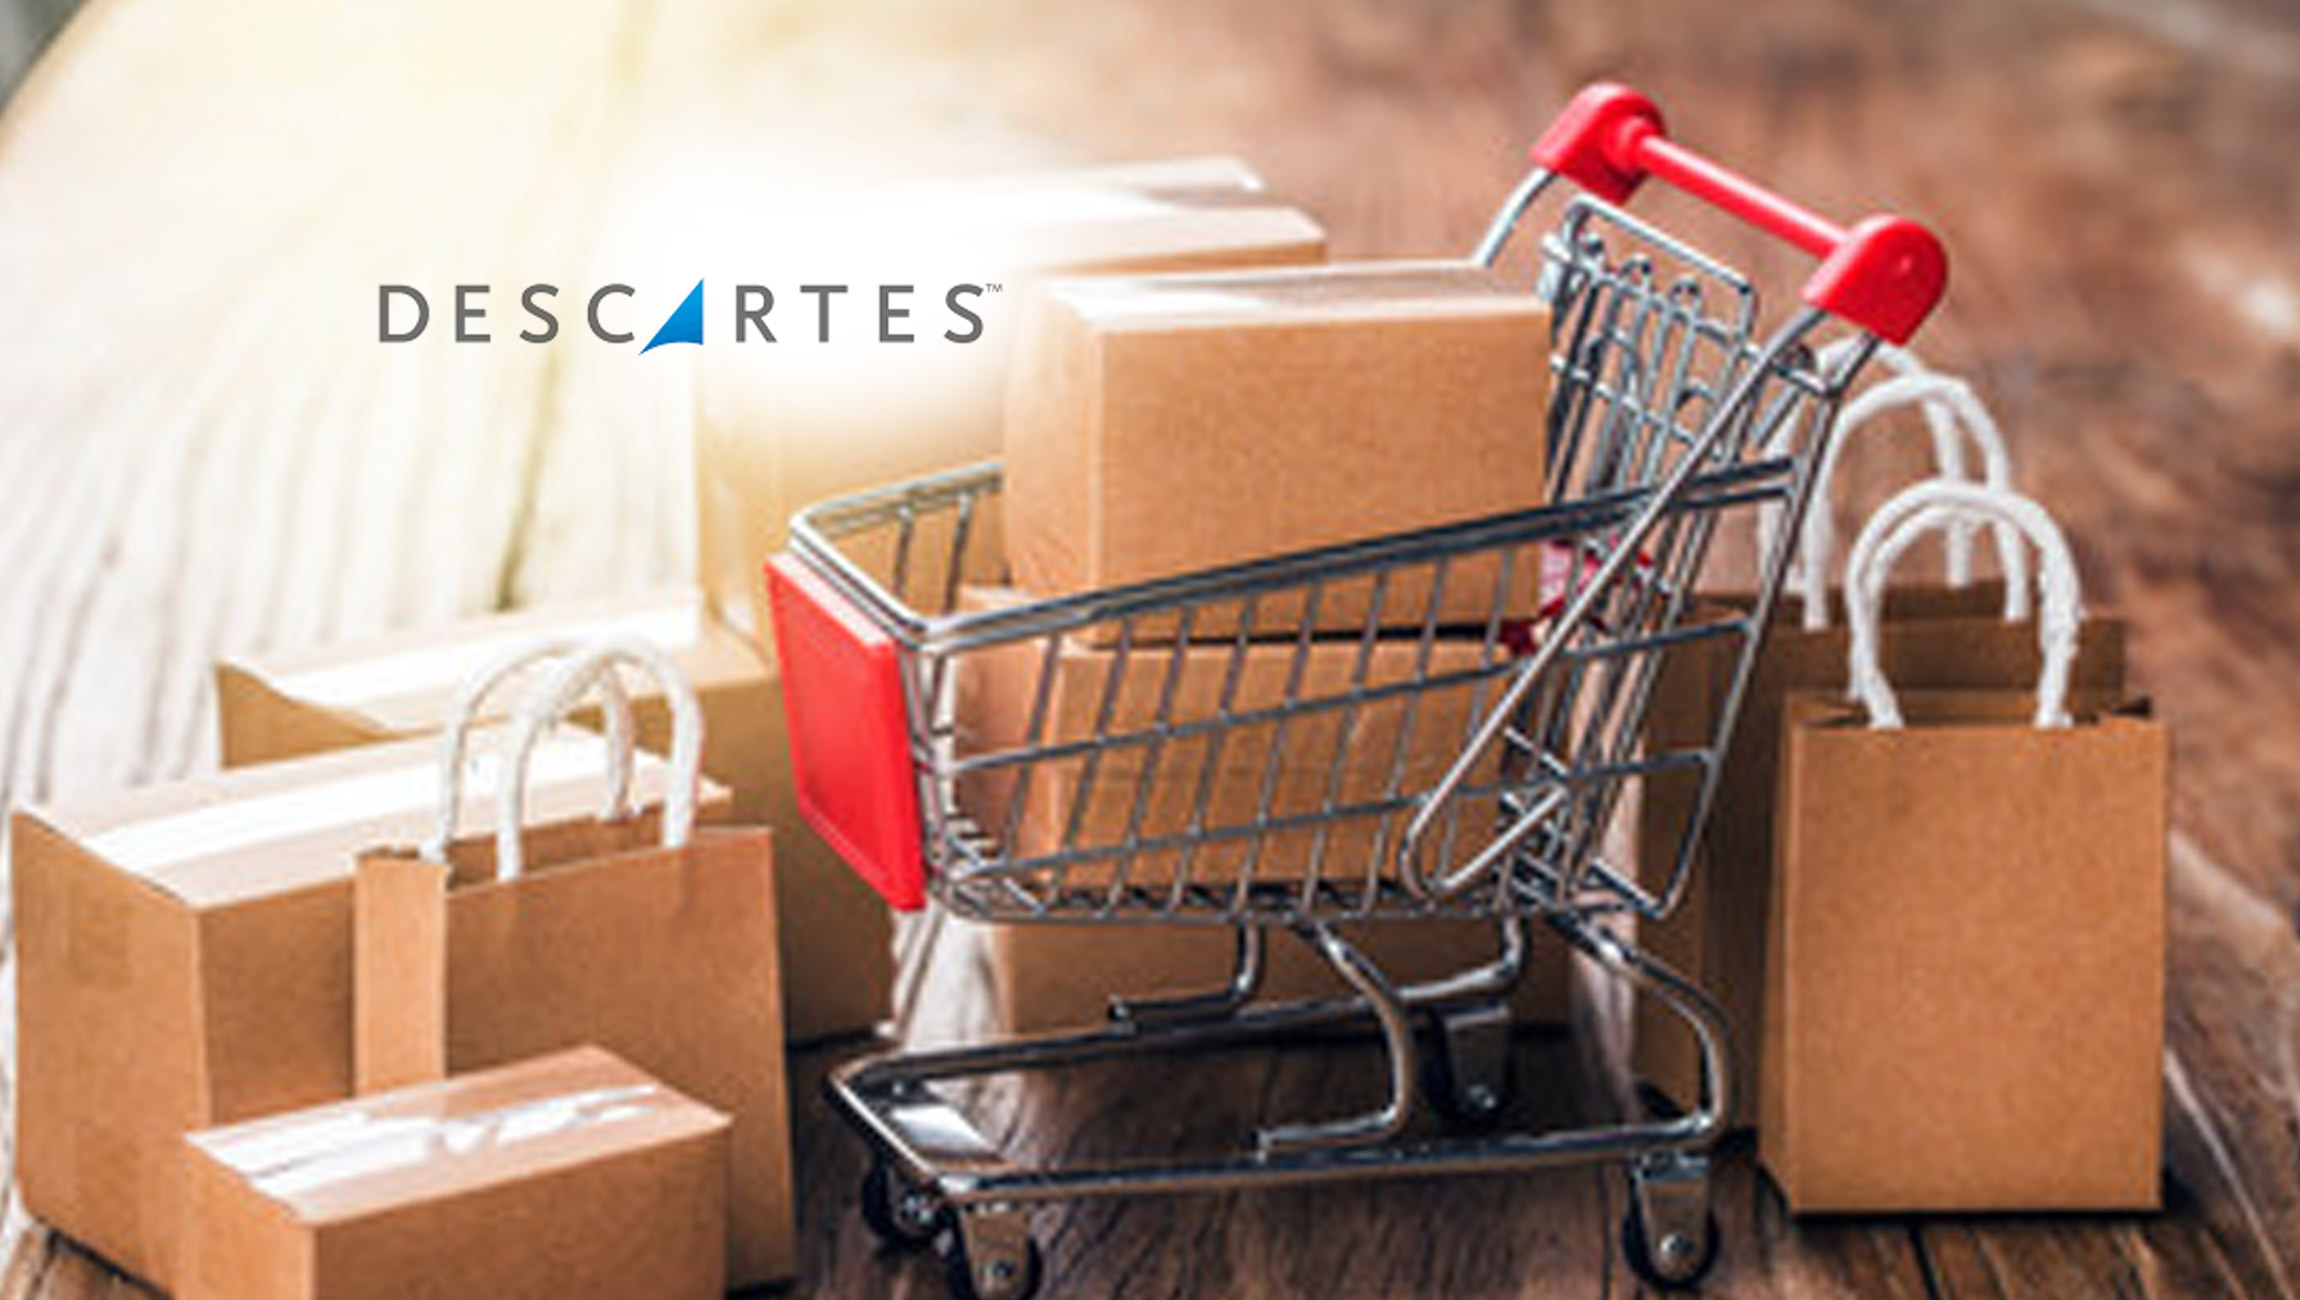 Descartes’ Annual Ecommerce Study Shows Slightly Improved Home Delivery Performance as 67% of Consumers Still Face Delivery Problems